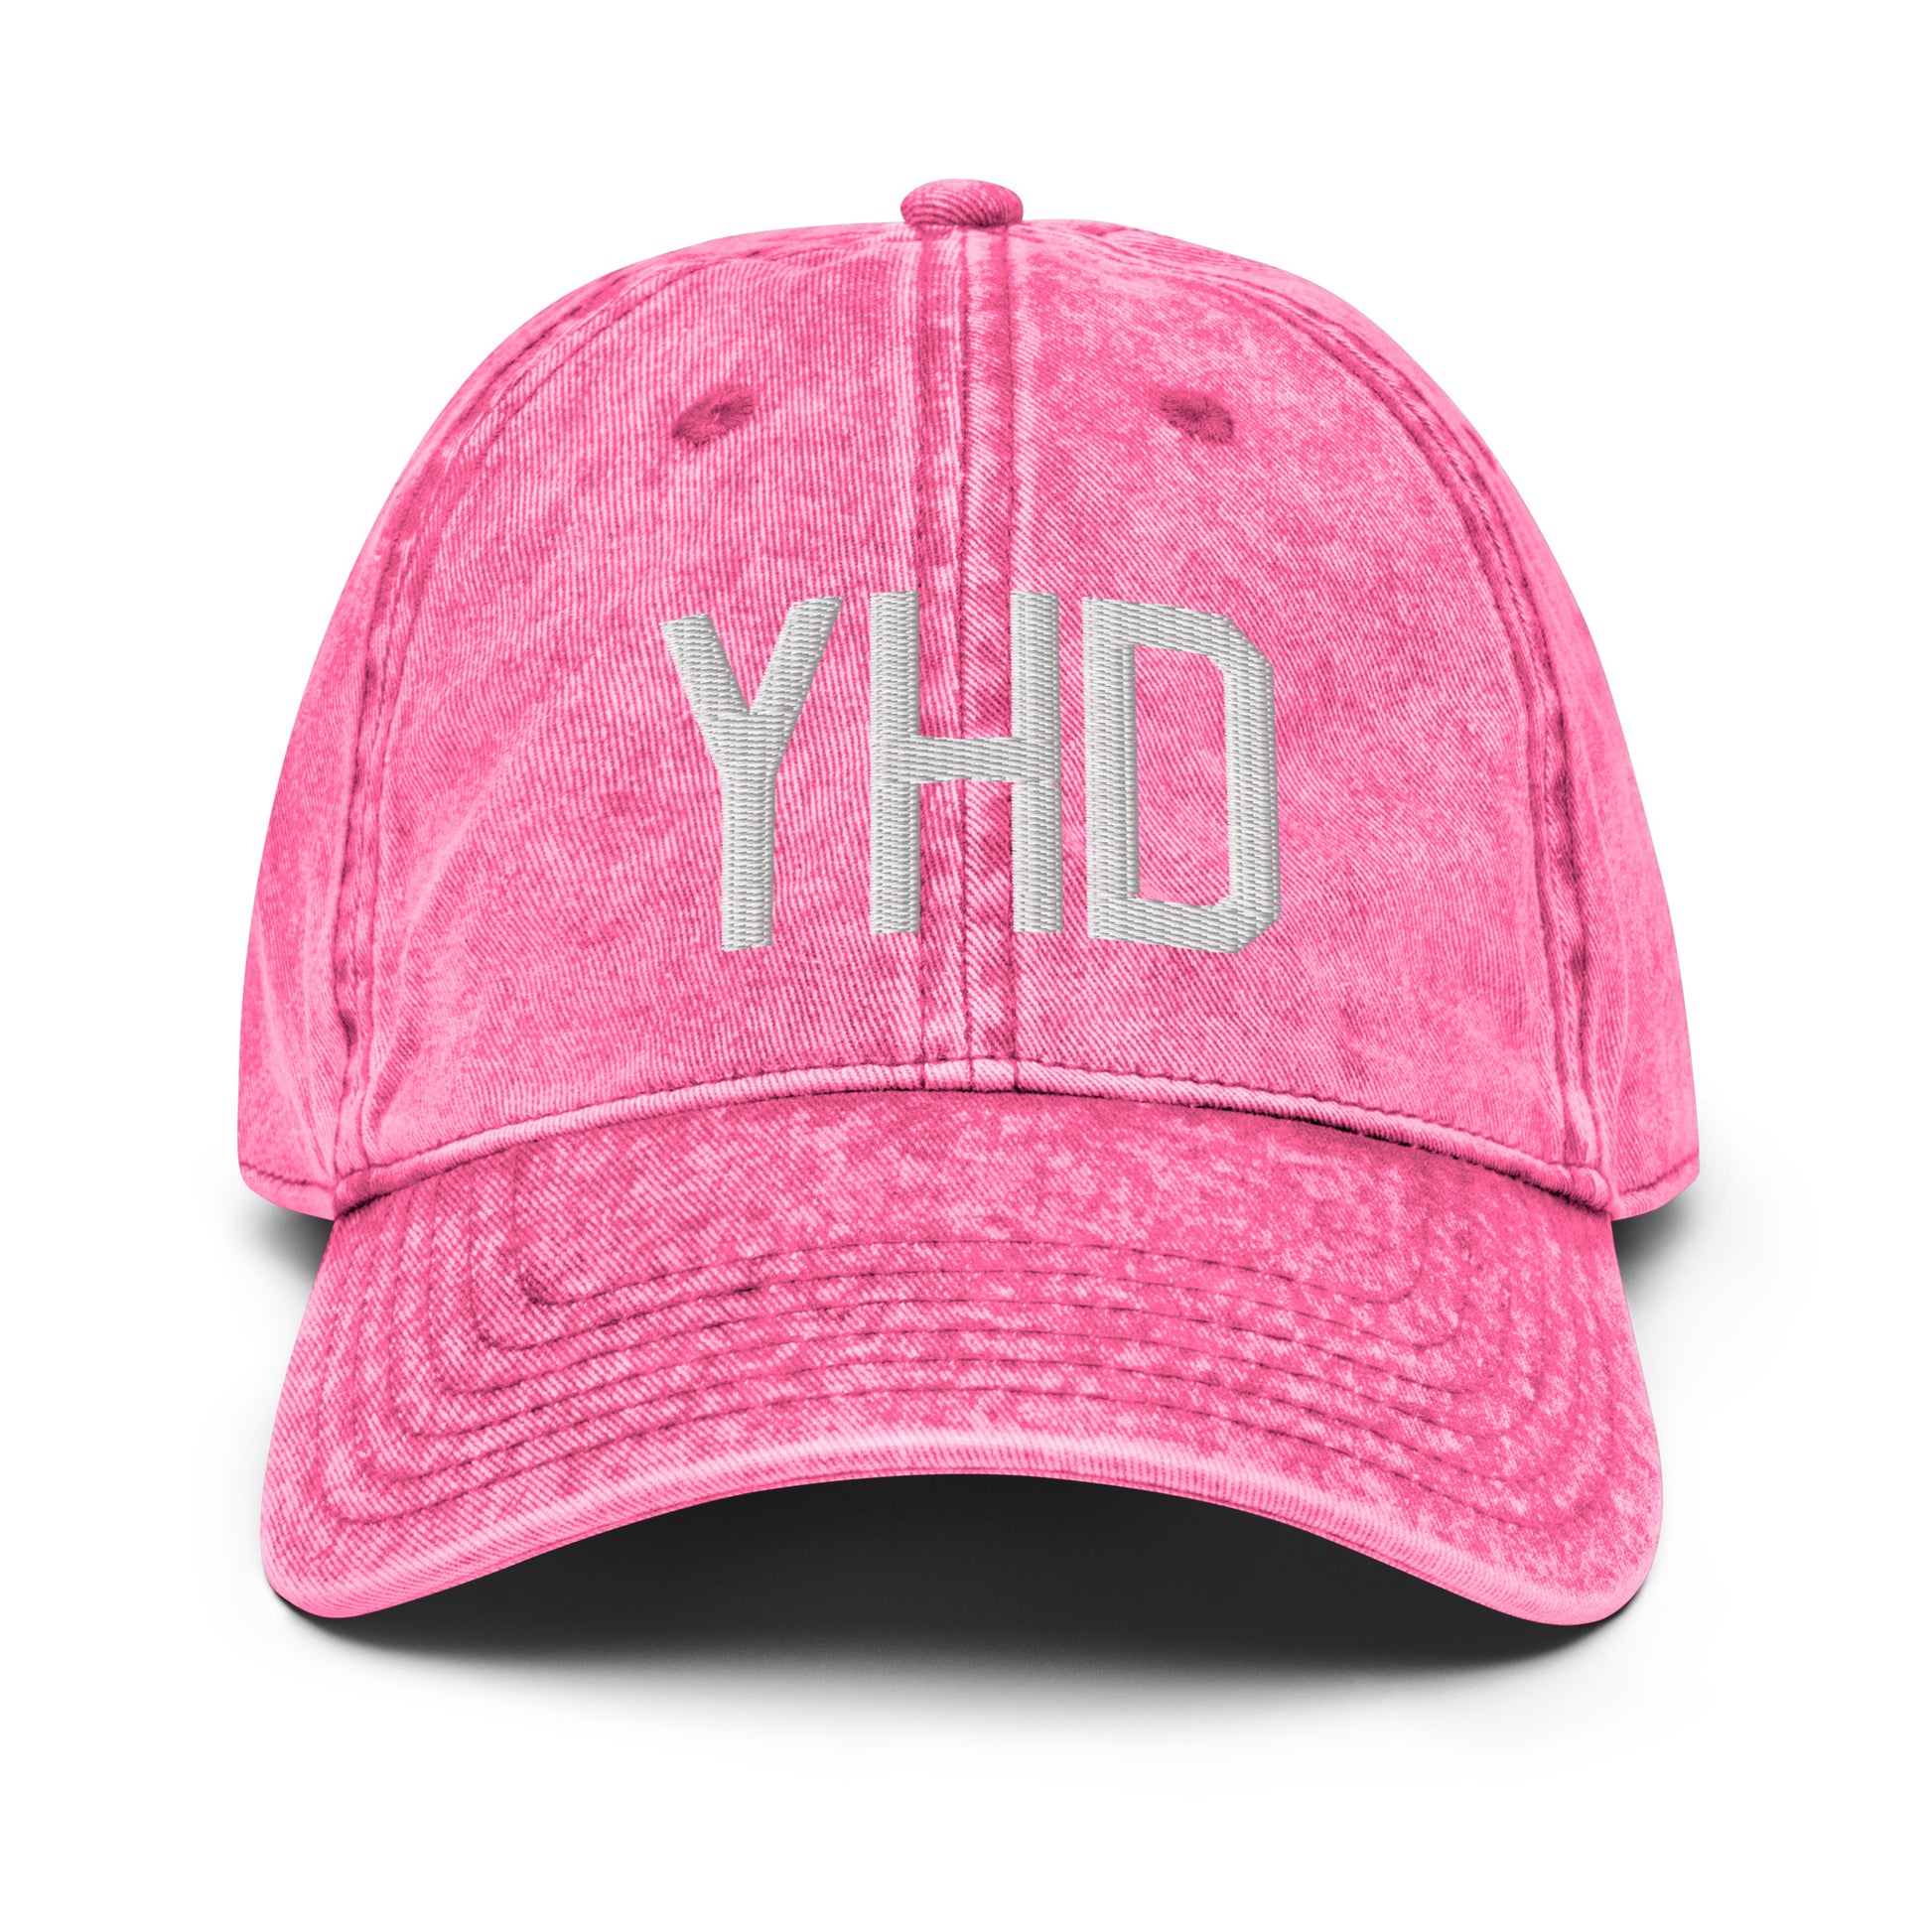 Airport Code Twill Cap - White • YHD Dryden • YHM Designs - Image 25